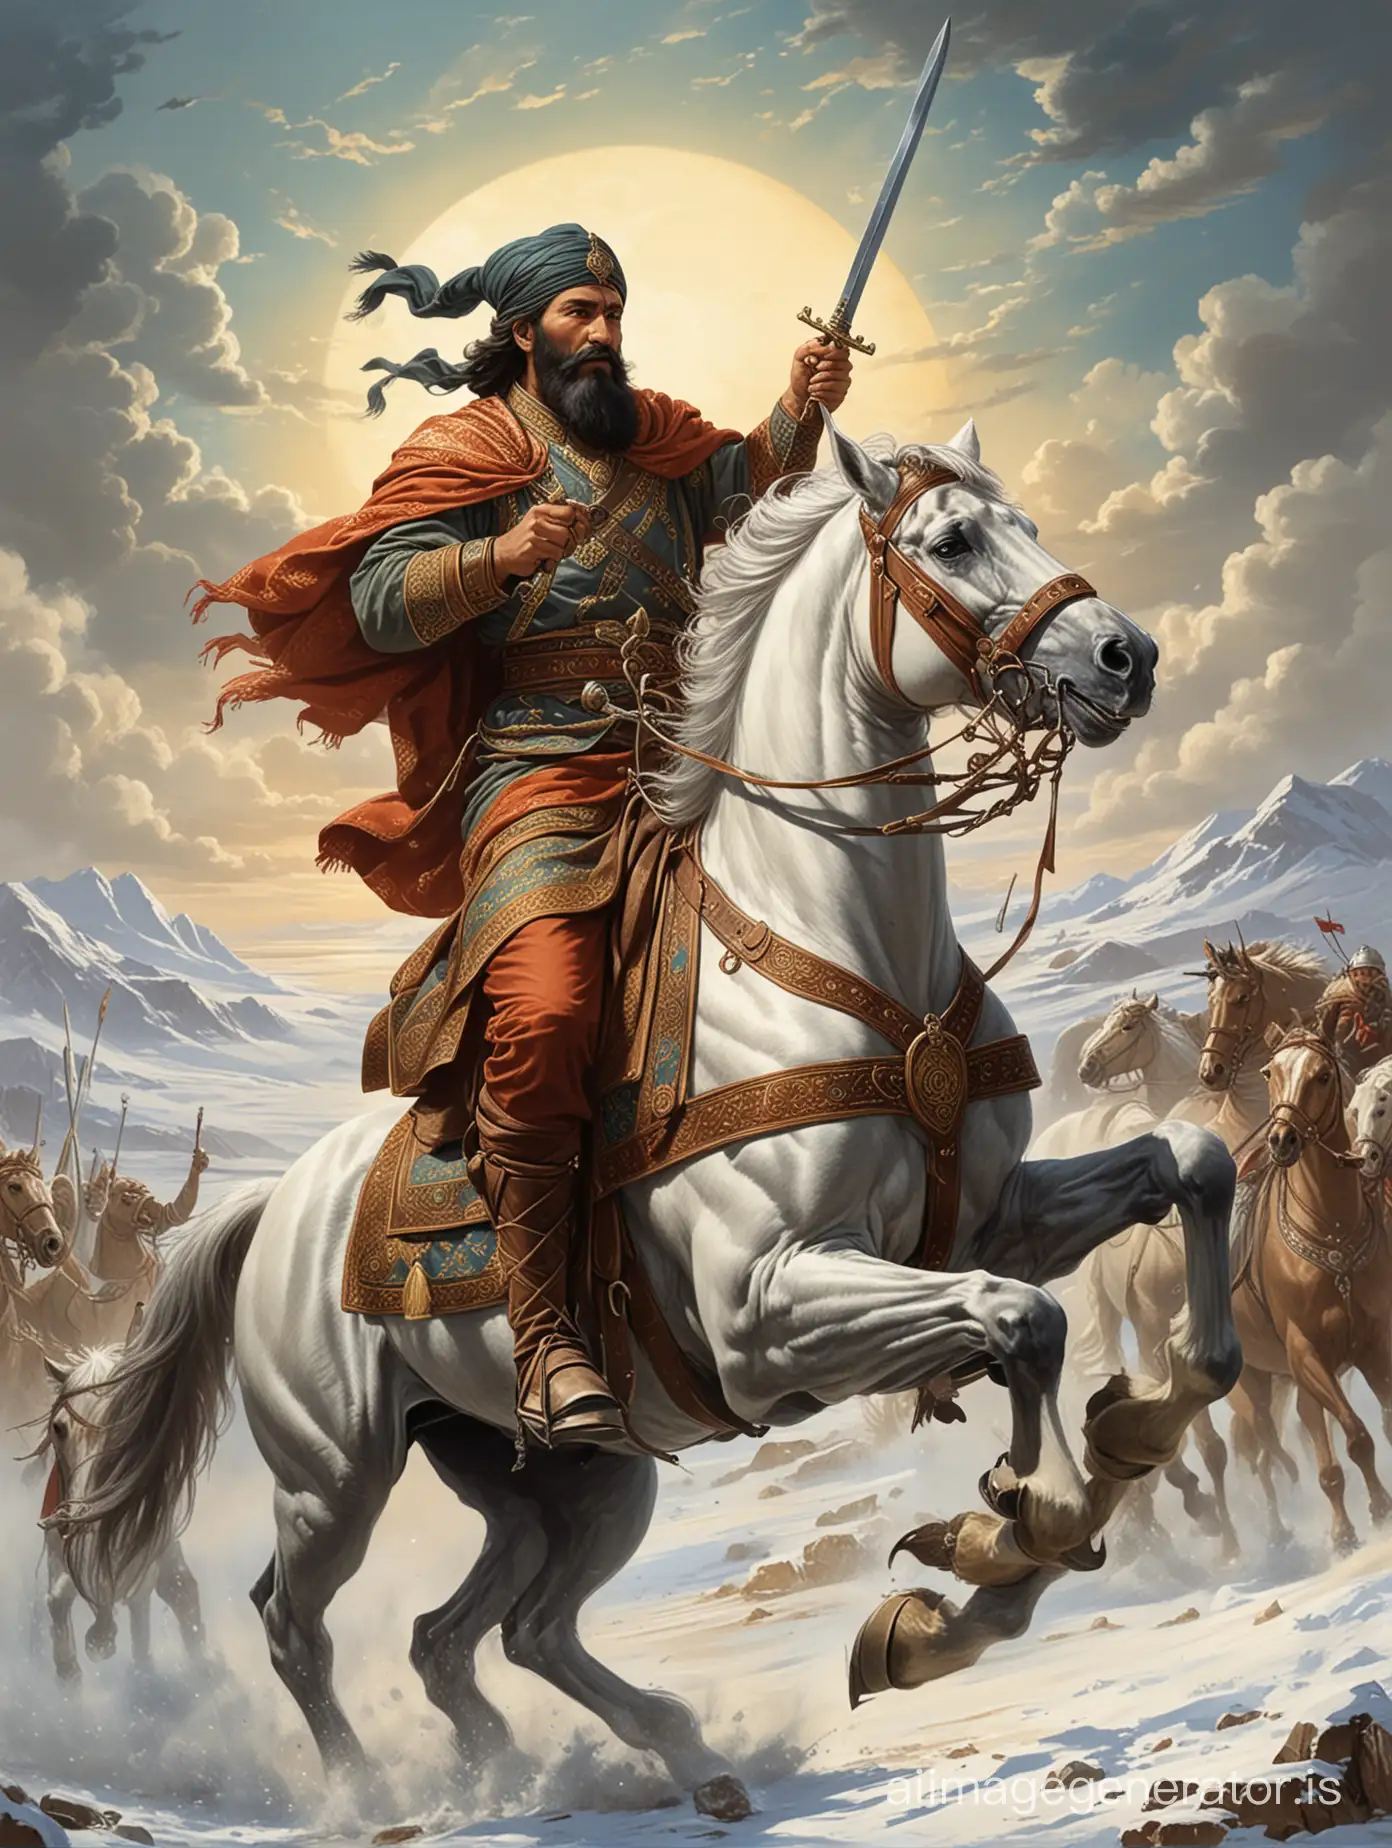 Illustration for a book cover. Jalaluddin Manguberdi. Commander of Khorezm. On horseback, sword and cold. In the ancient oriental style